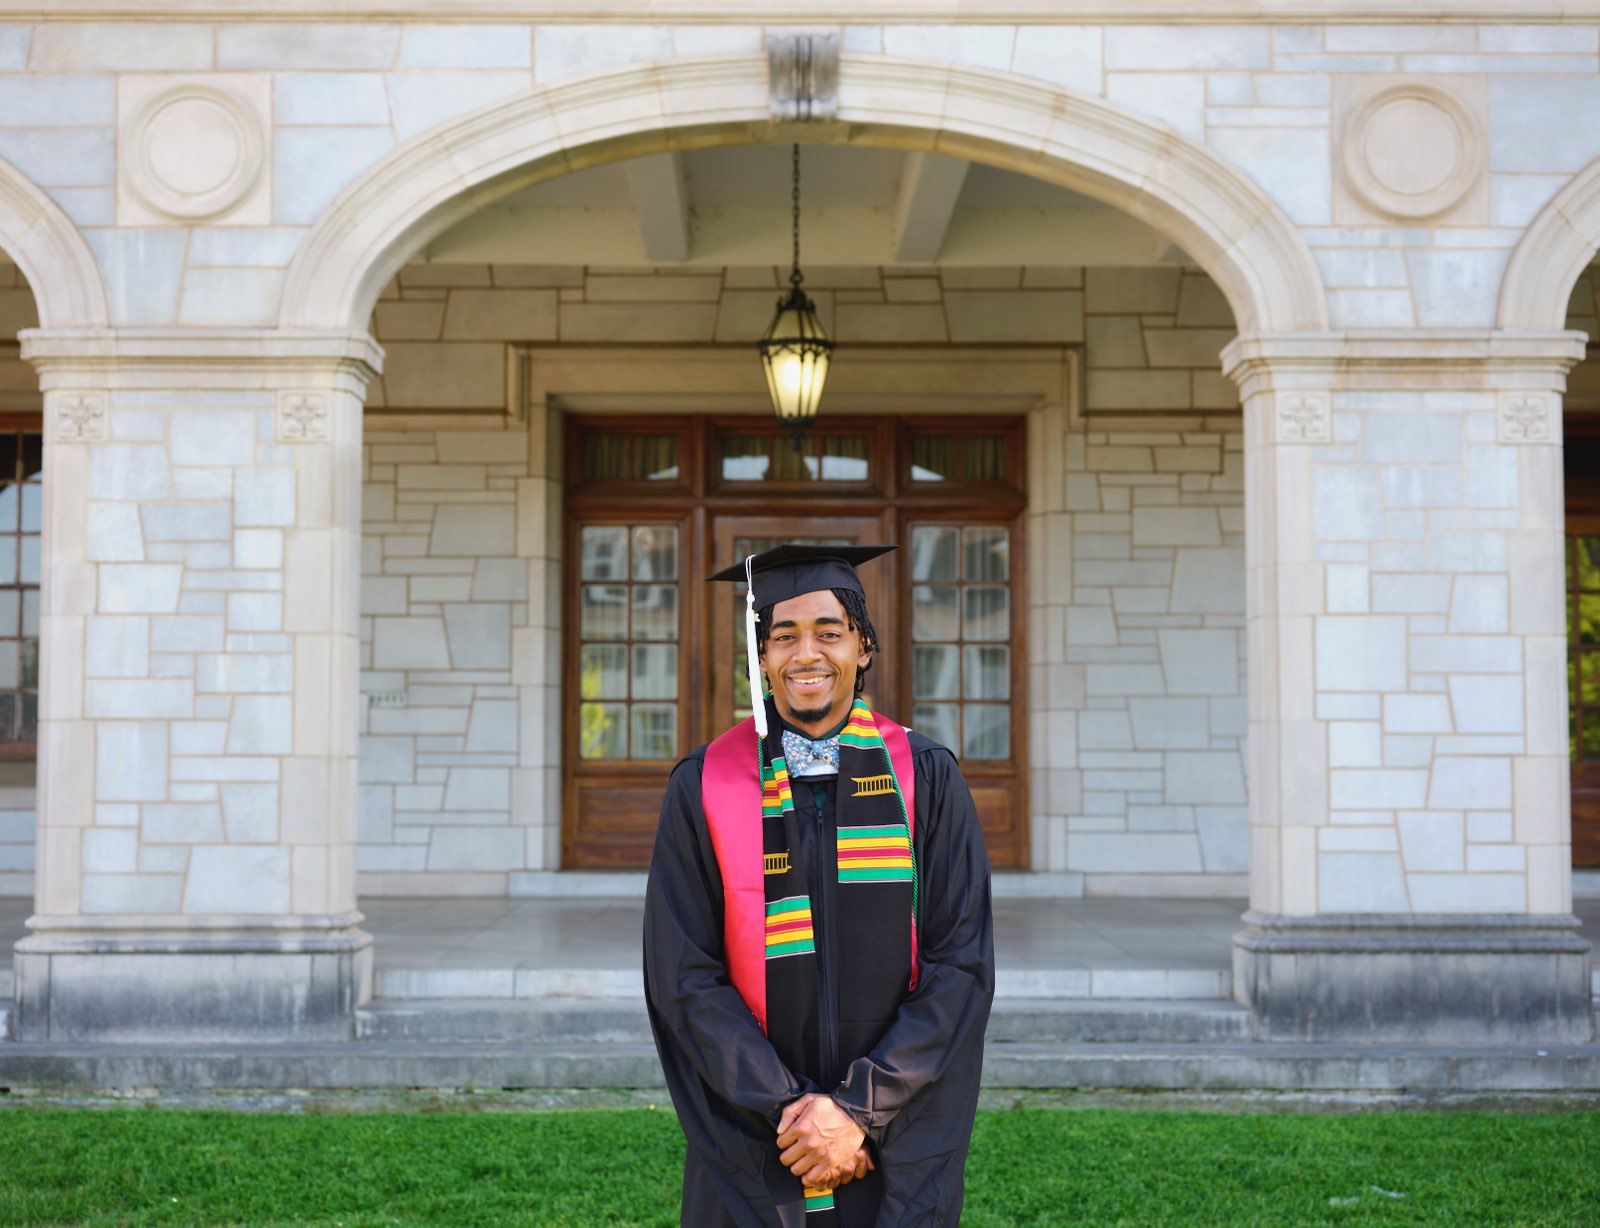 A young black man in a graduation cap and gown standing in front of a building with a marble facade